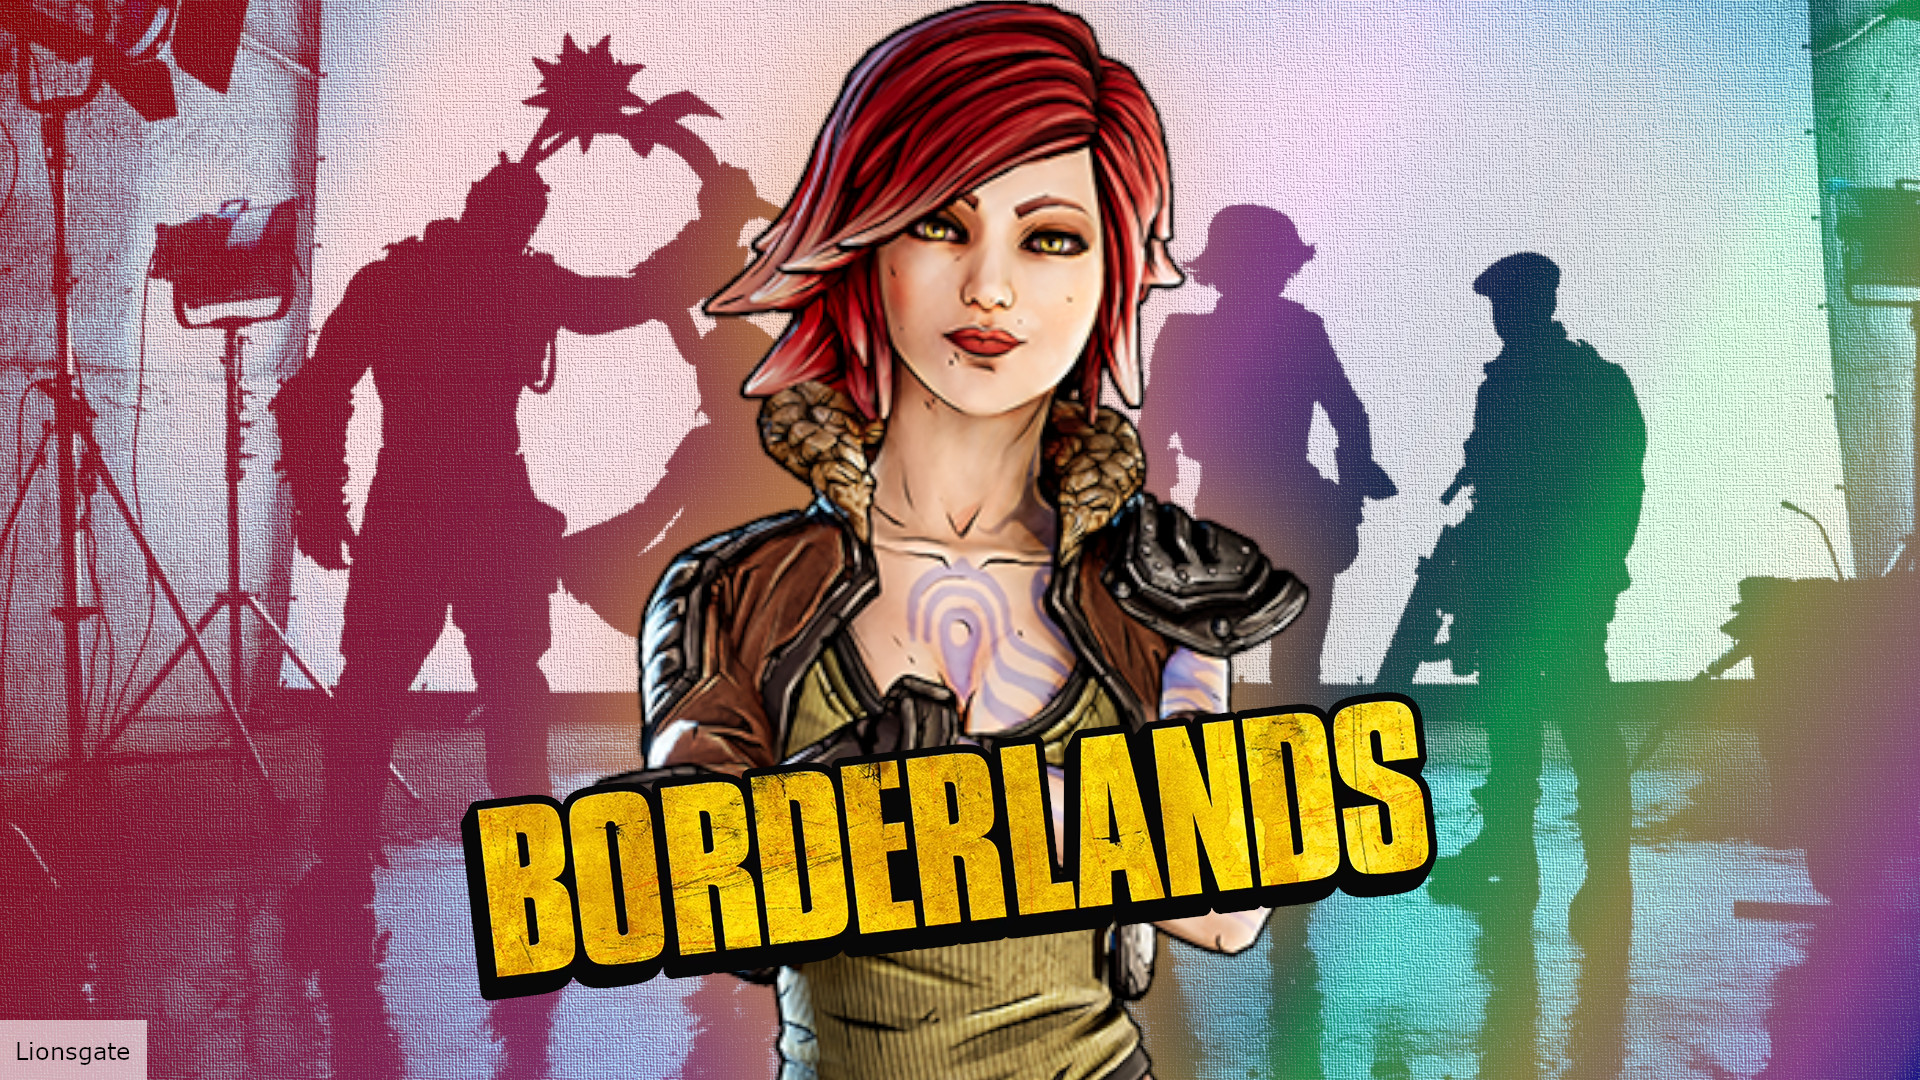 Borderlands movie release date, cast, plot, and more news